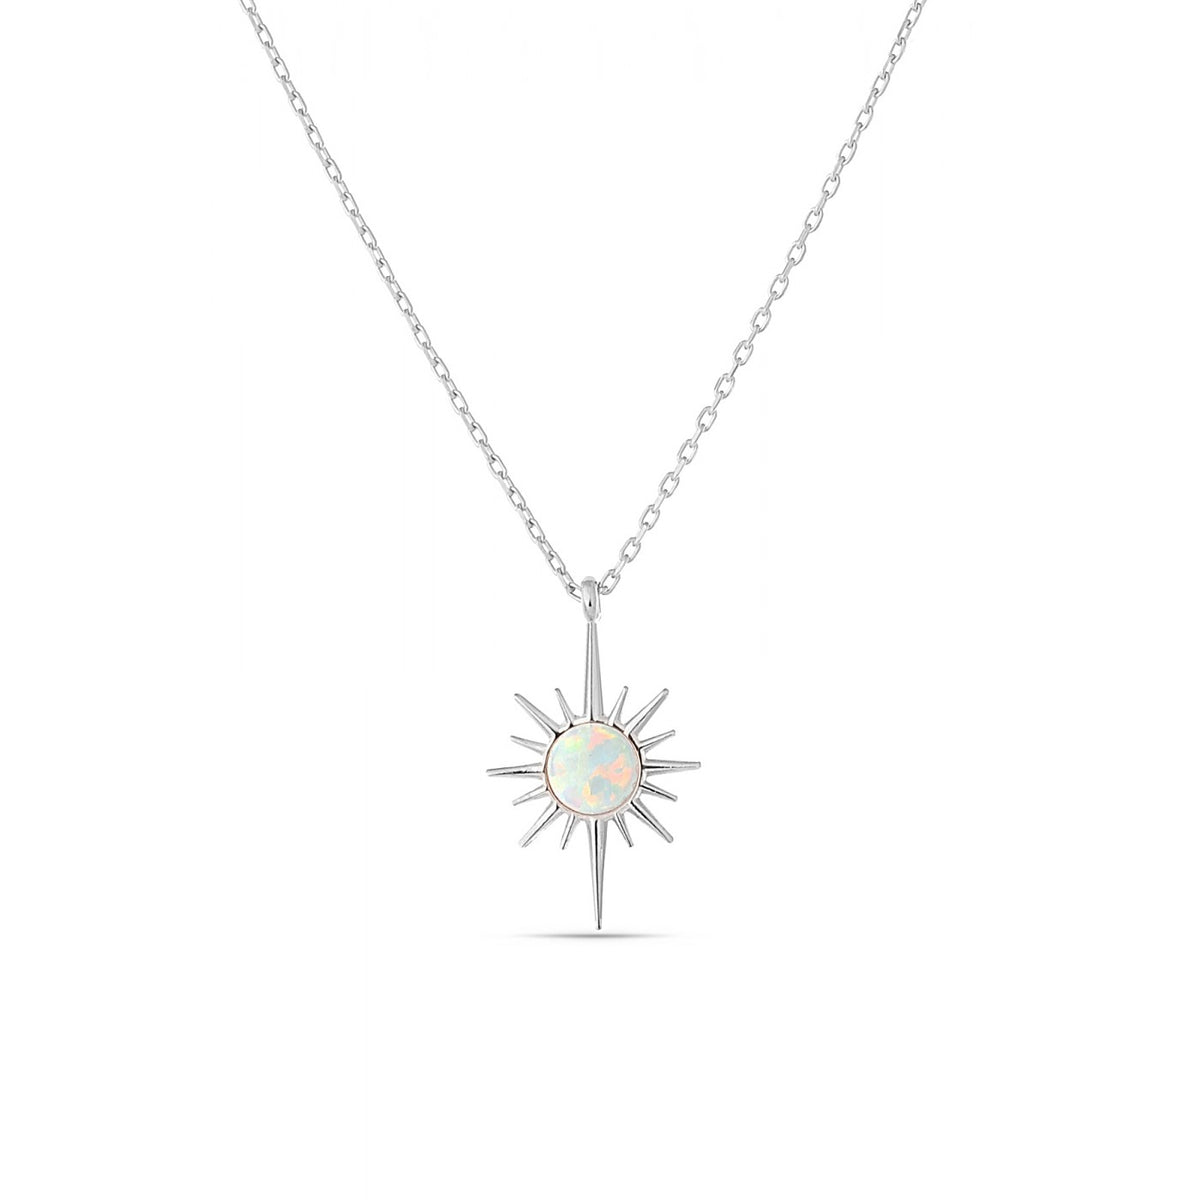 White Opal Northernstar Sterling Silver Pendant Necklace